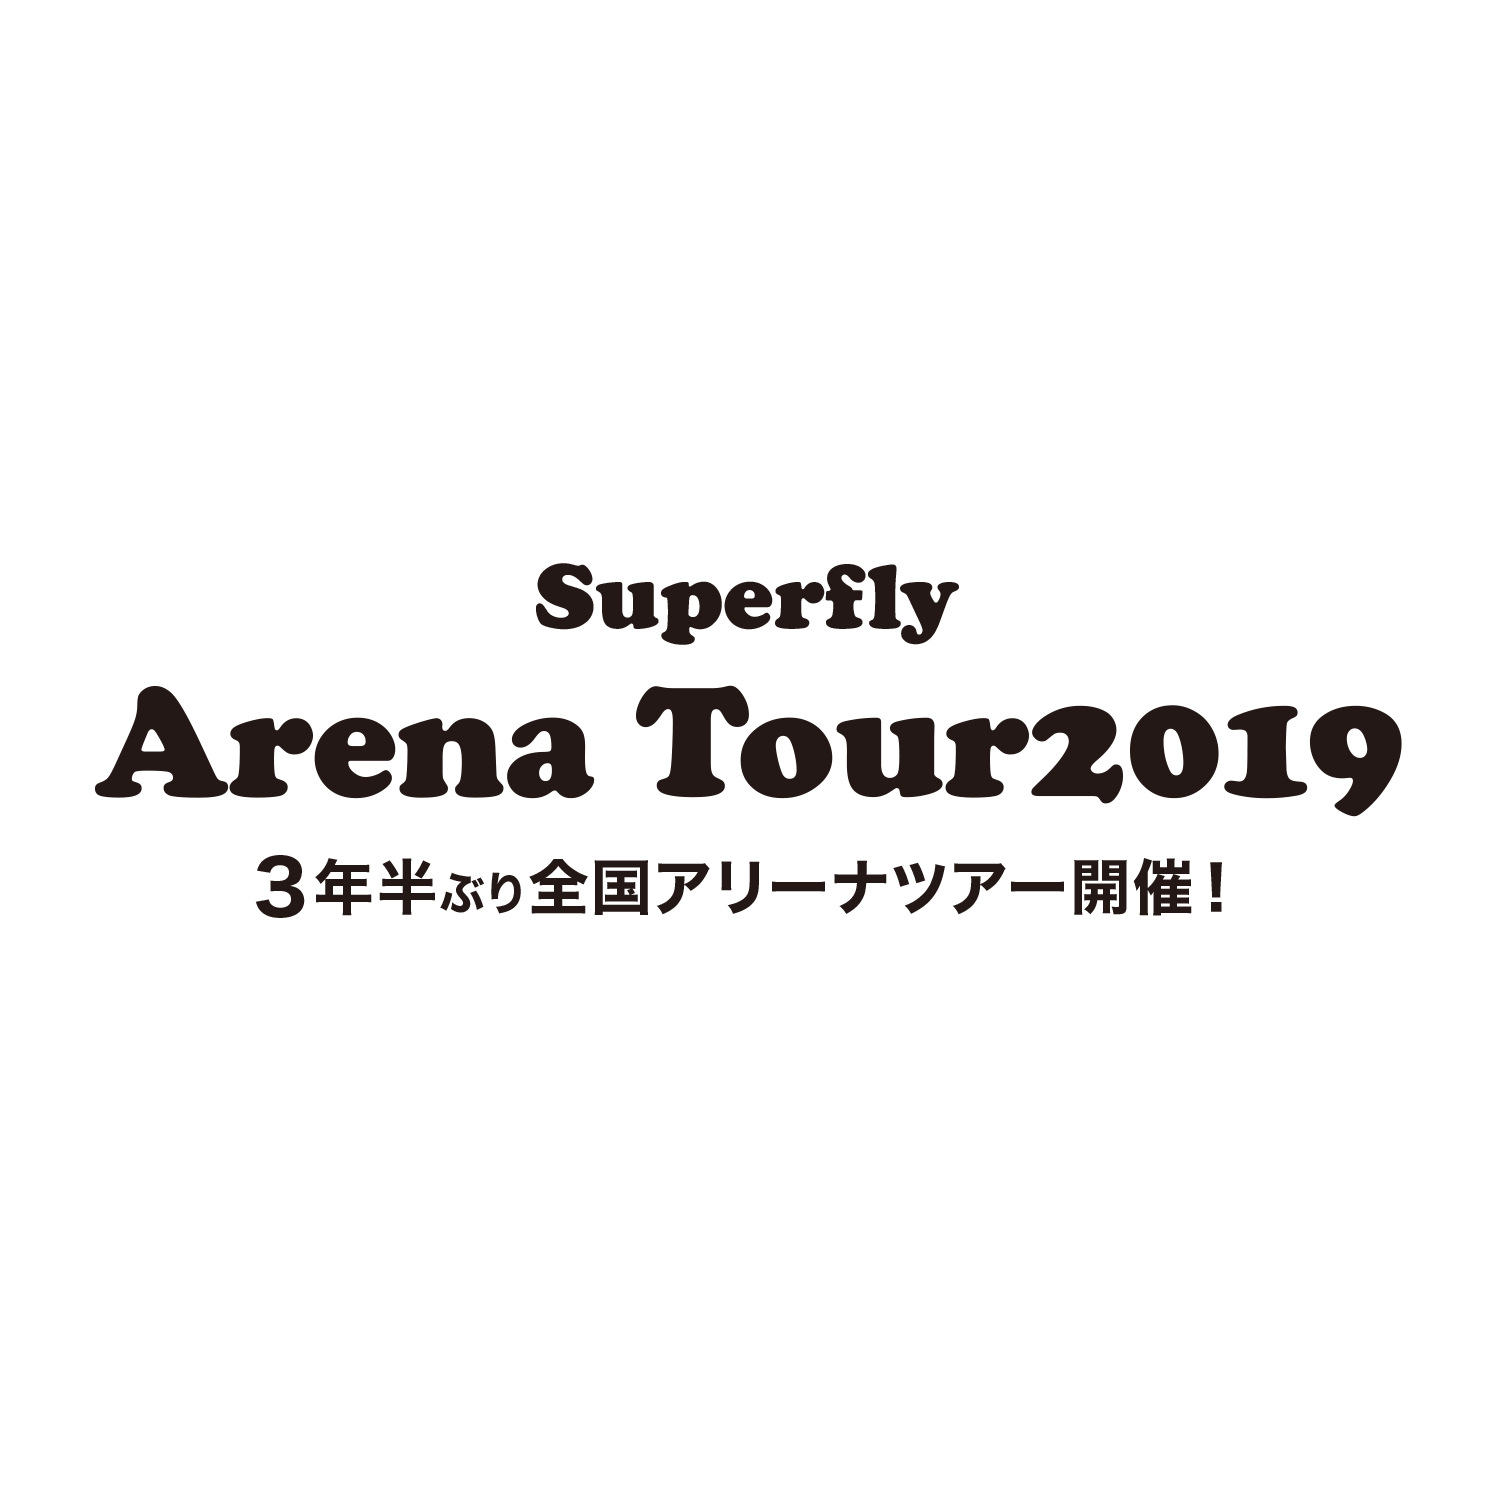 Superfly Arena Tour 19 0